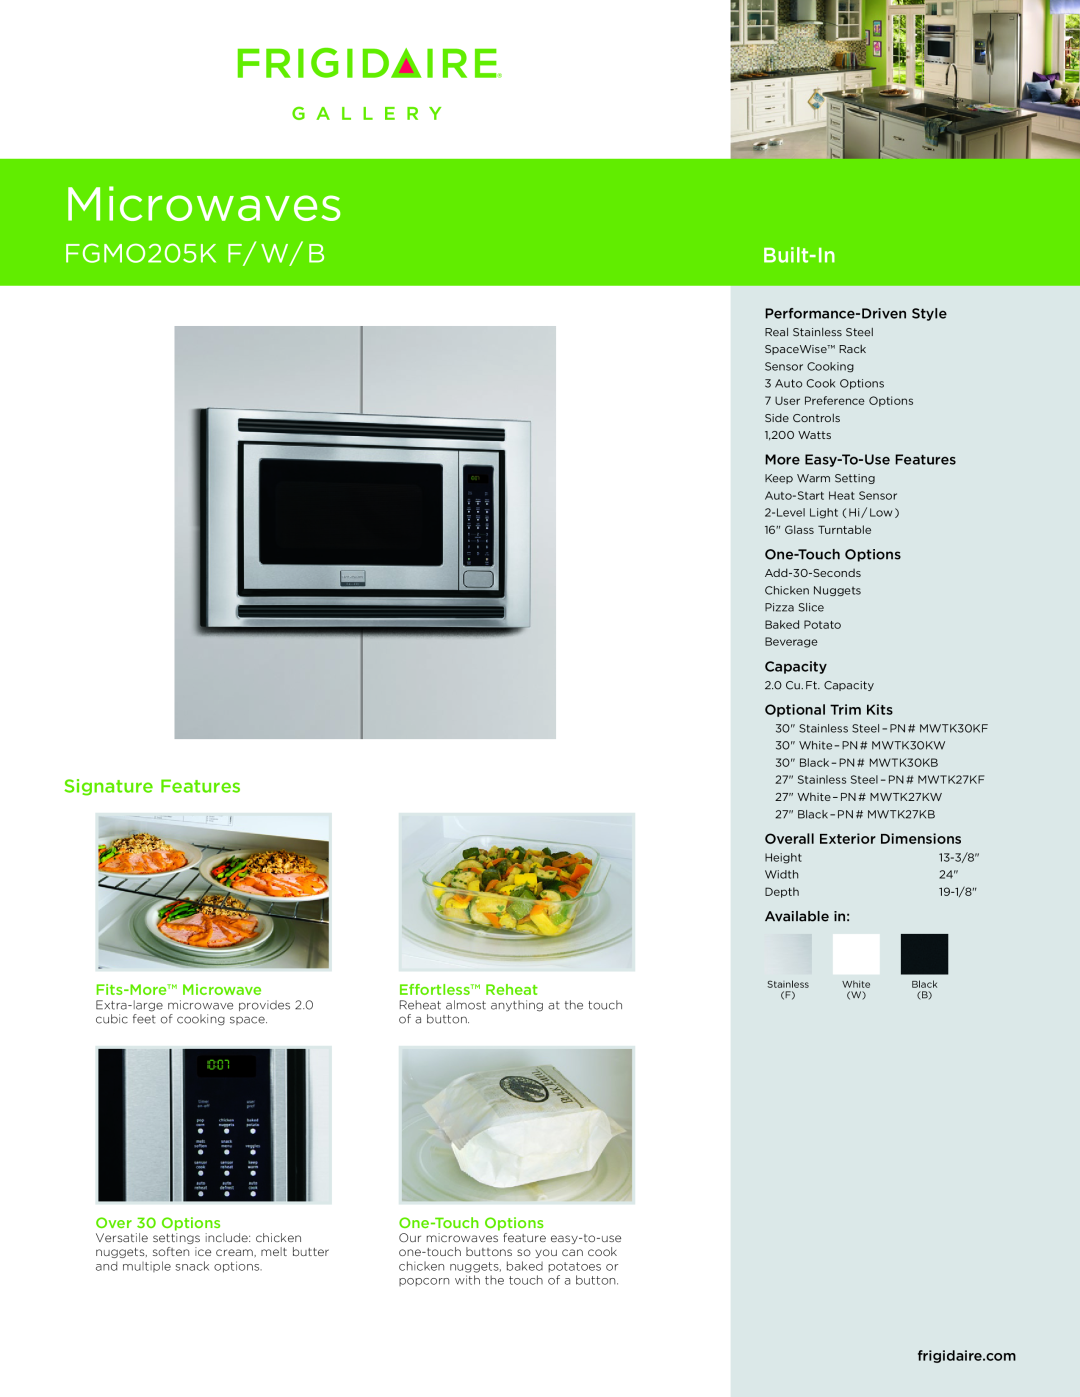 Frigidaire FGMO205KB dimensions Performance-DrivenStyle, More Easy-To-UseFeatures, One-TouchOptions, Capacity, Microwaves 